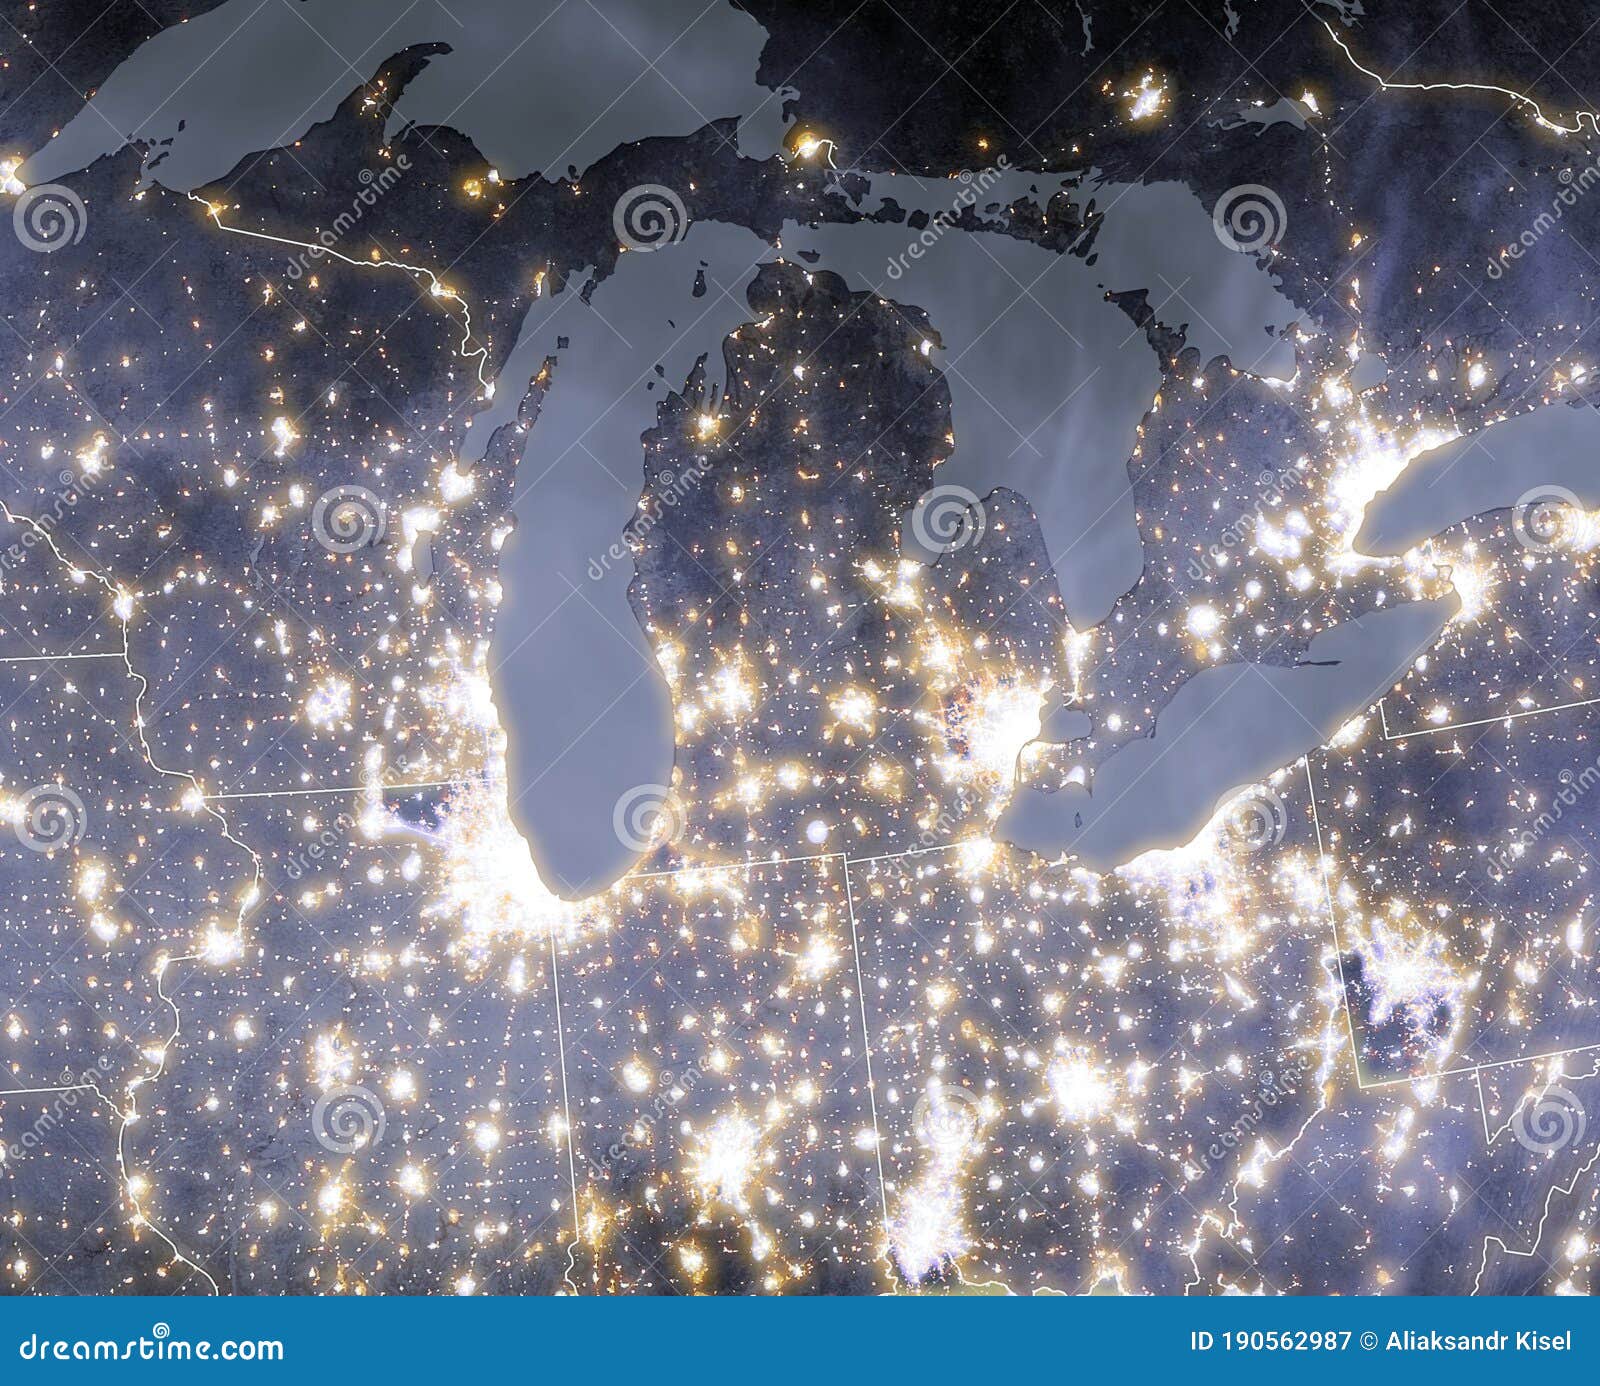 night lights of u.s. cities, vivid night pollution of chicago city agglomeration. a view from space. image s courtesy of